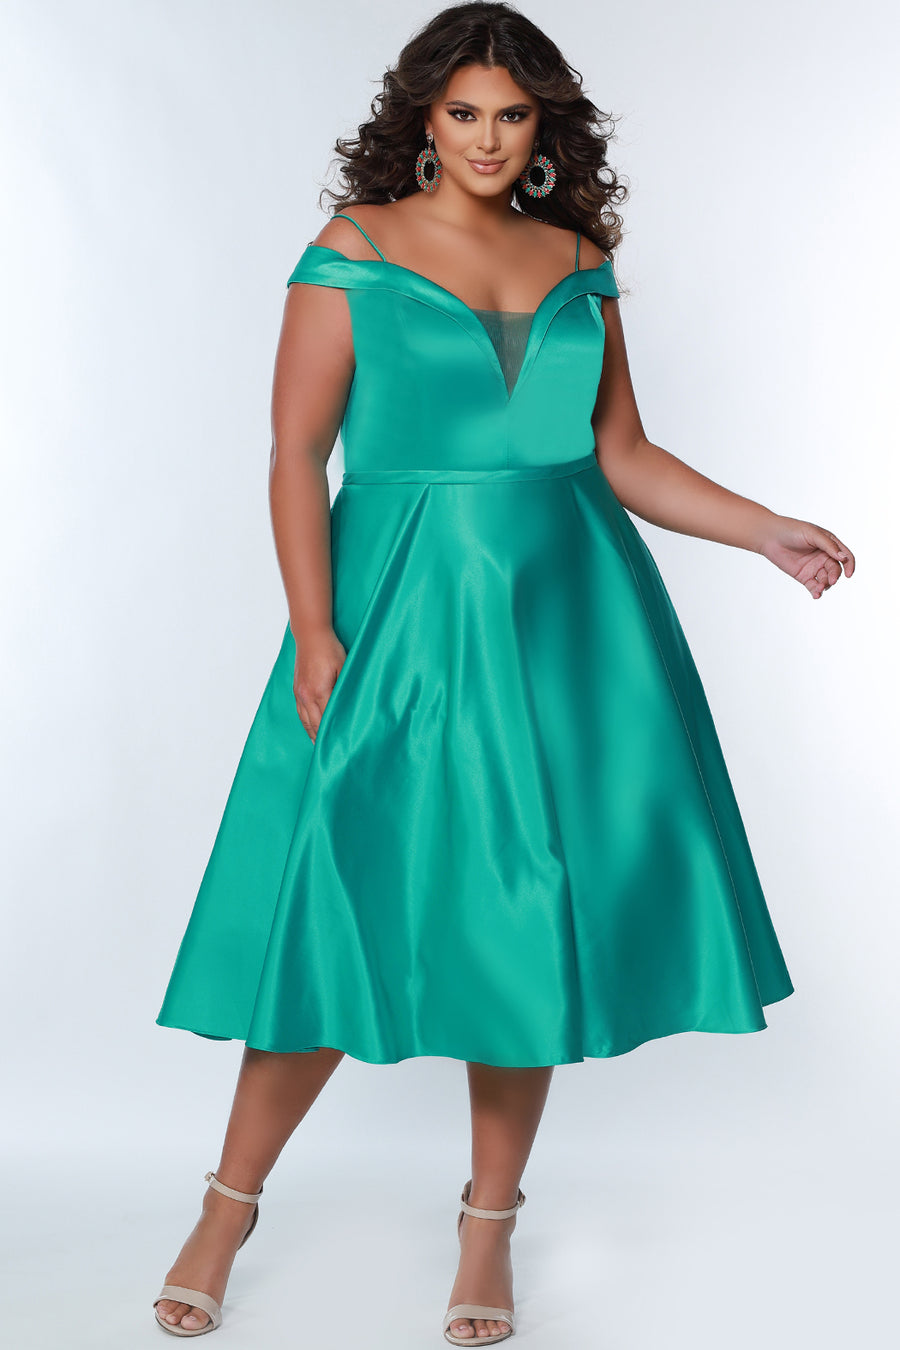 Simply Divine Party Dress